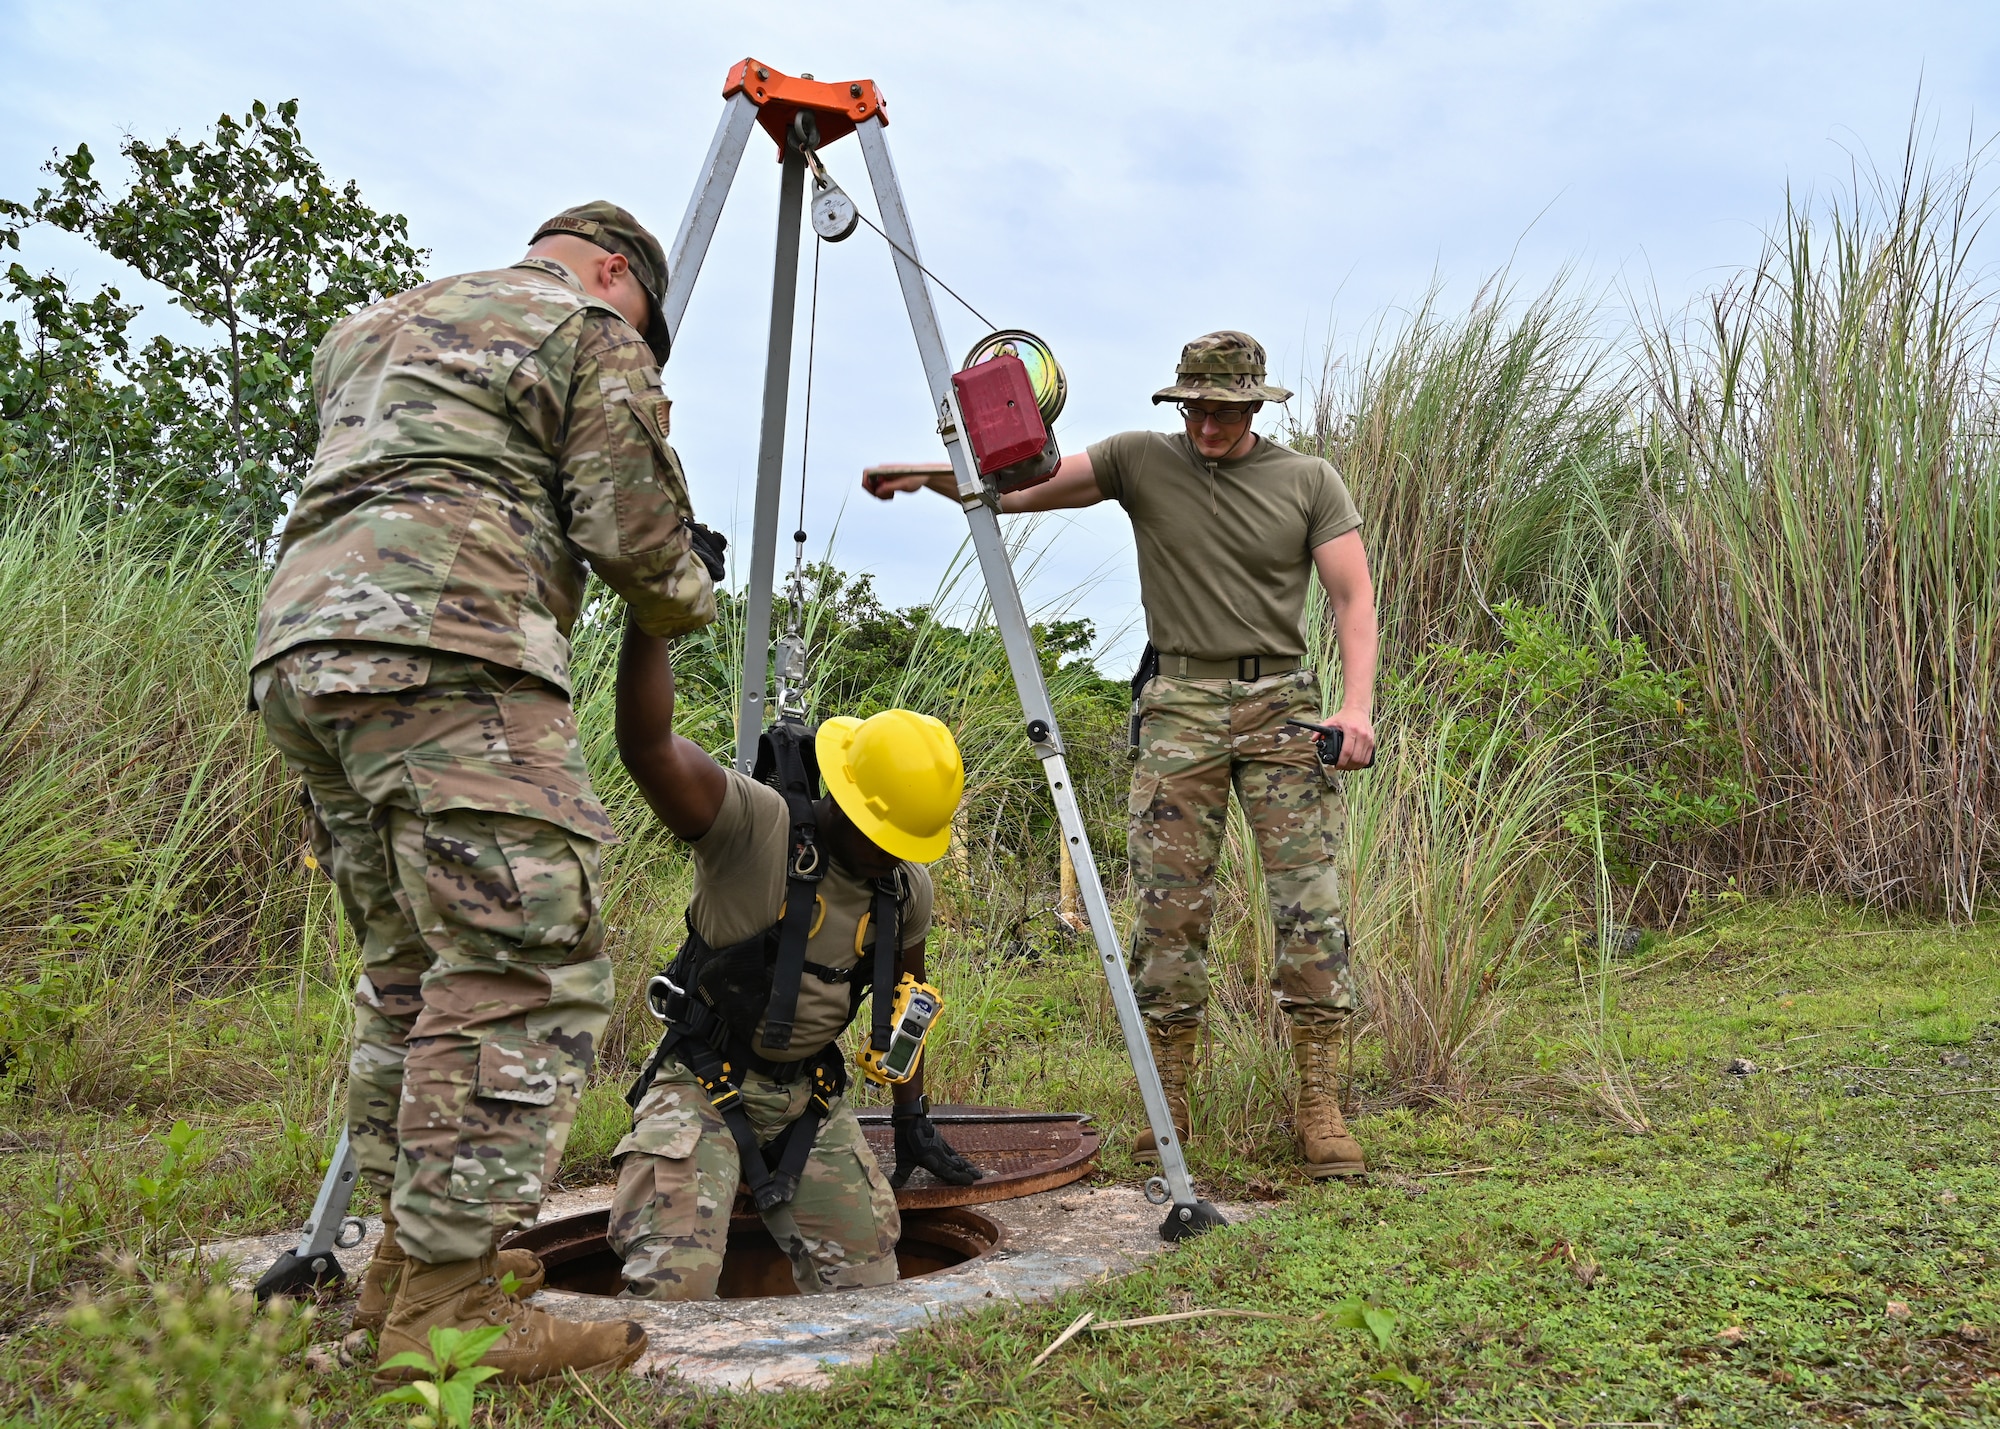 U.S. Air National Guard Master Sgt. Nicholas Martinez, 205th Engineering Installation Squadron first sergeant, and Staff Sgt. Zachery Muth, 210th Engineering Installation Squadron cable antenna systems craftsman, assist Airman 1st Class Abu Bangura, 205 EIS cable antenna systems apprentice, exit a telecommunications maintenance hole on Andersen Air Force Base, Guam, July 26, 2022. U.S. Air National Guard engineering installation squadrons from across the country have integrated as one unit to work alongside the 36th Communications Squadron to refresh records and repair infrastructure on Andersen AFB. (U.S. Air Force photo by Airman 1st Class Lauren Clevenger)